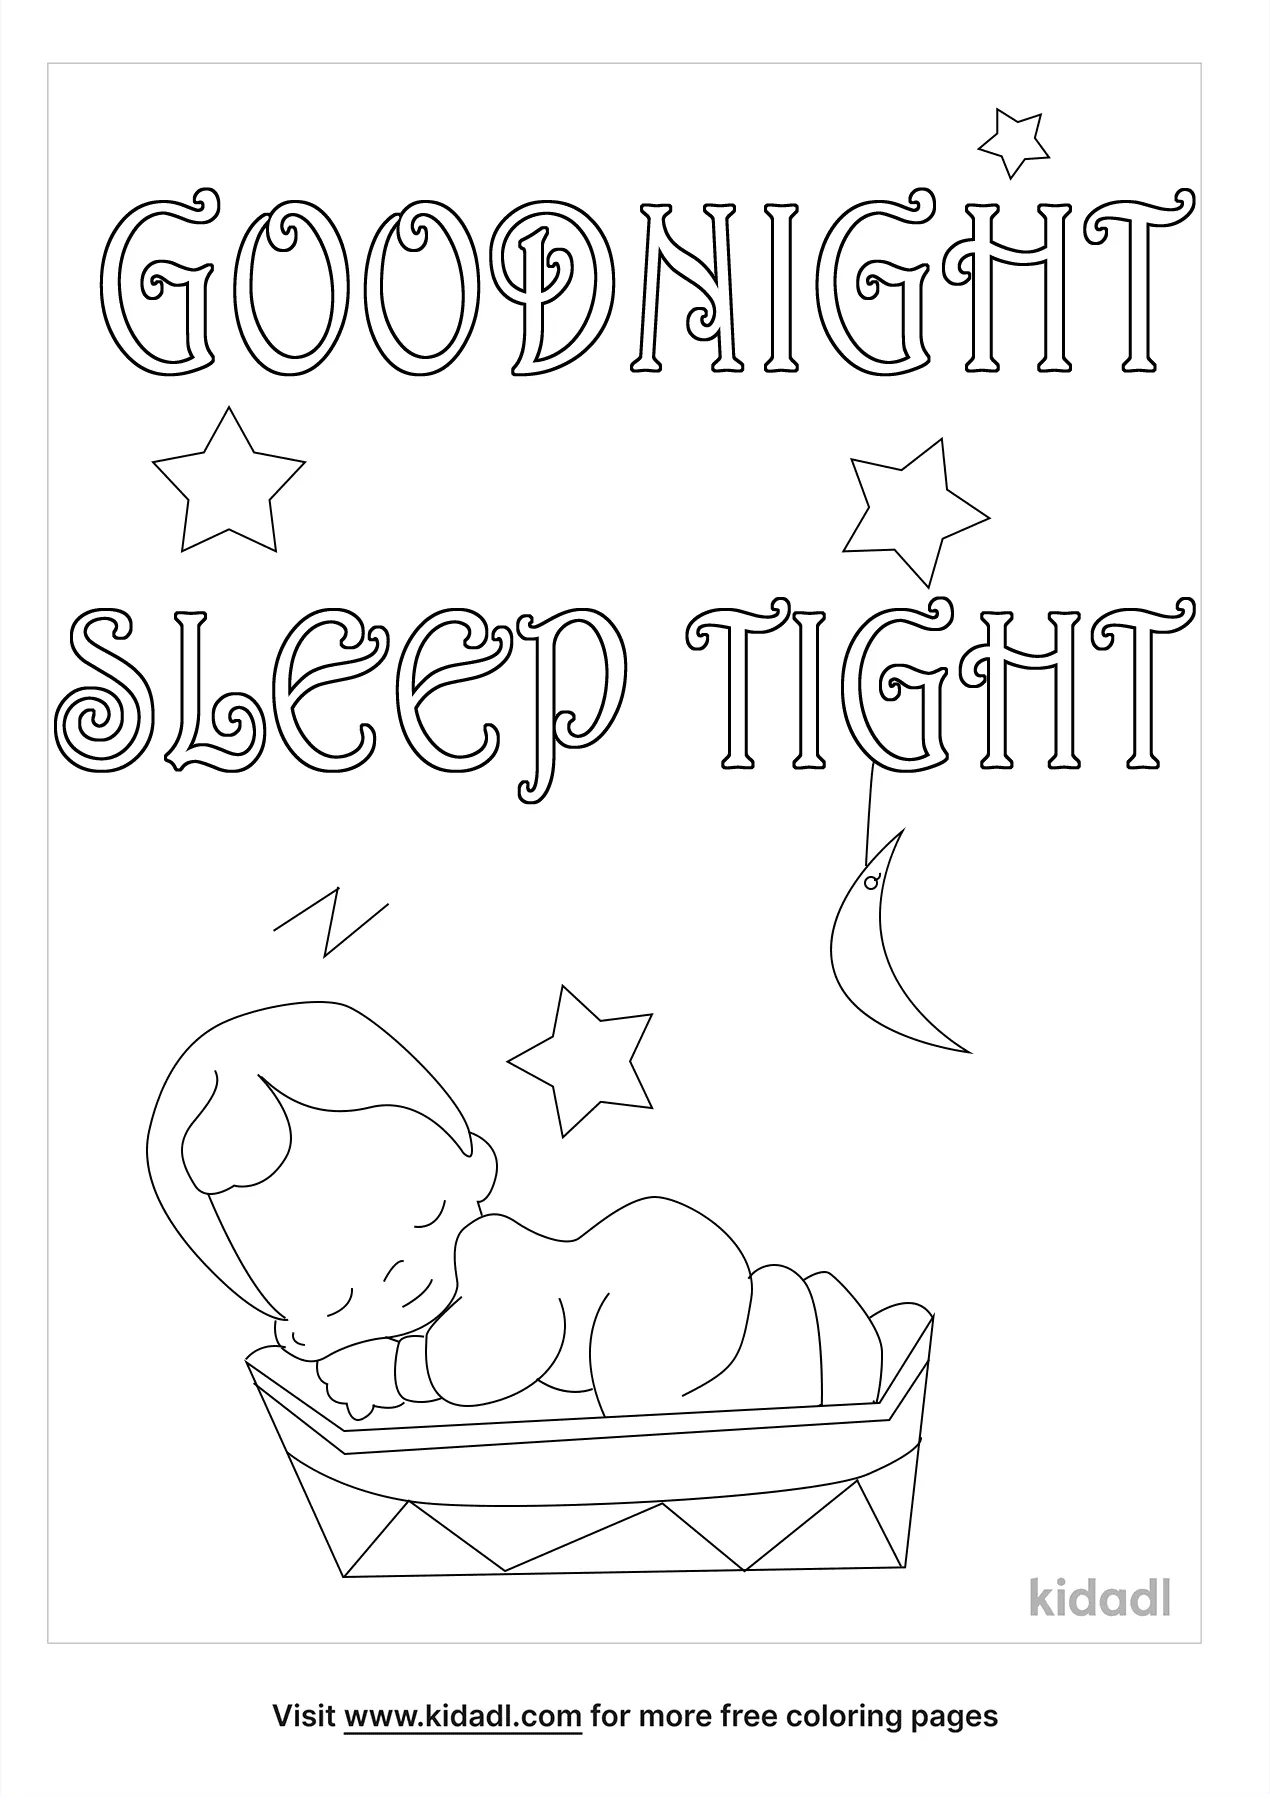 Free Goodnight Sleep Tight Coloring Page | Coloring Page Printables ...